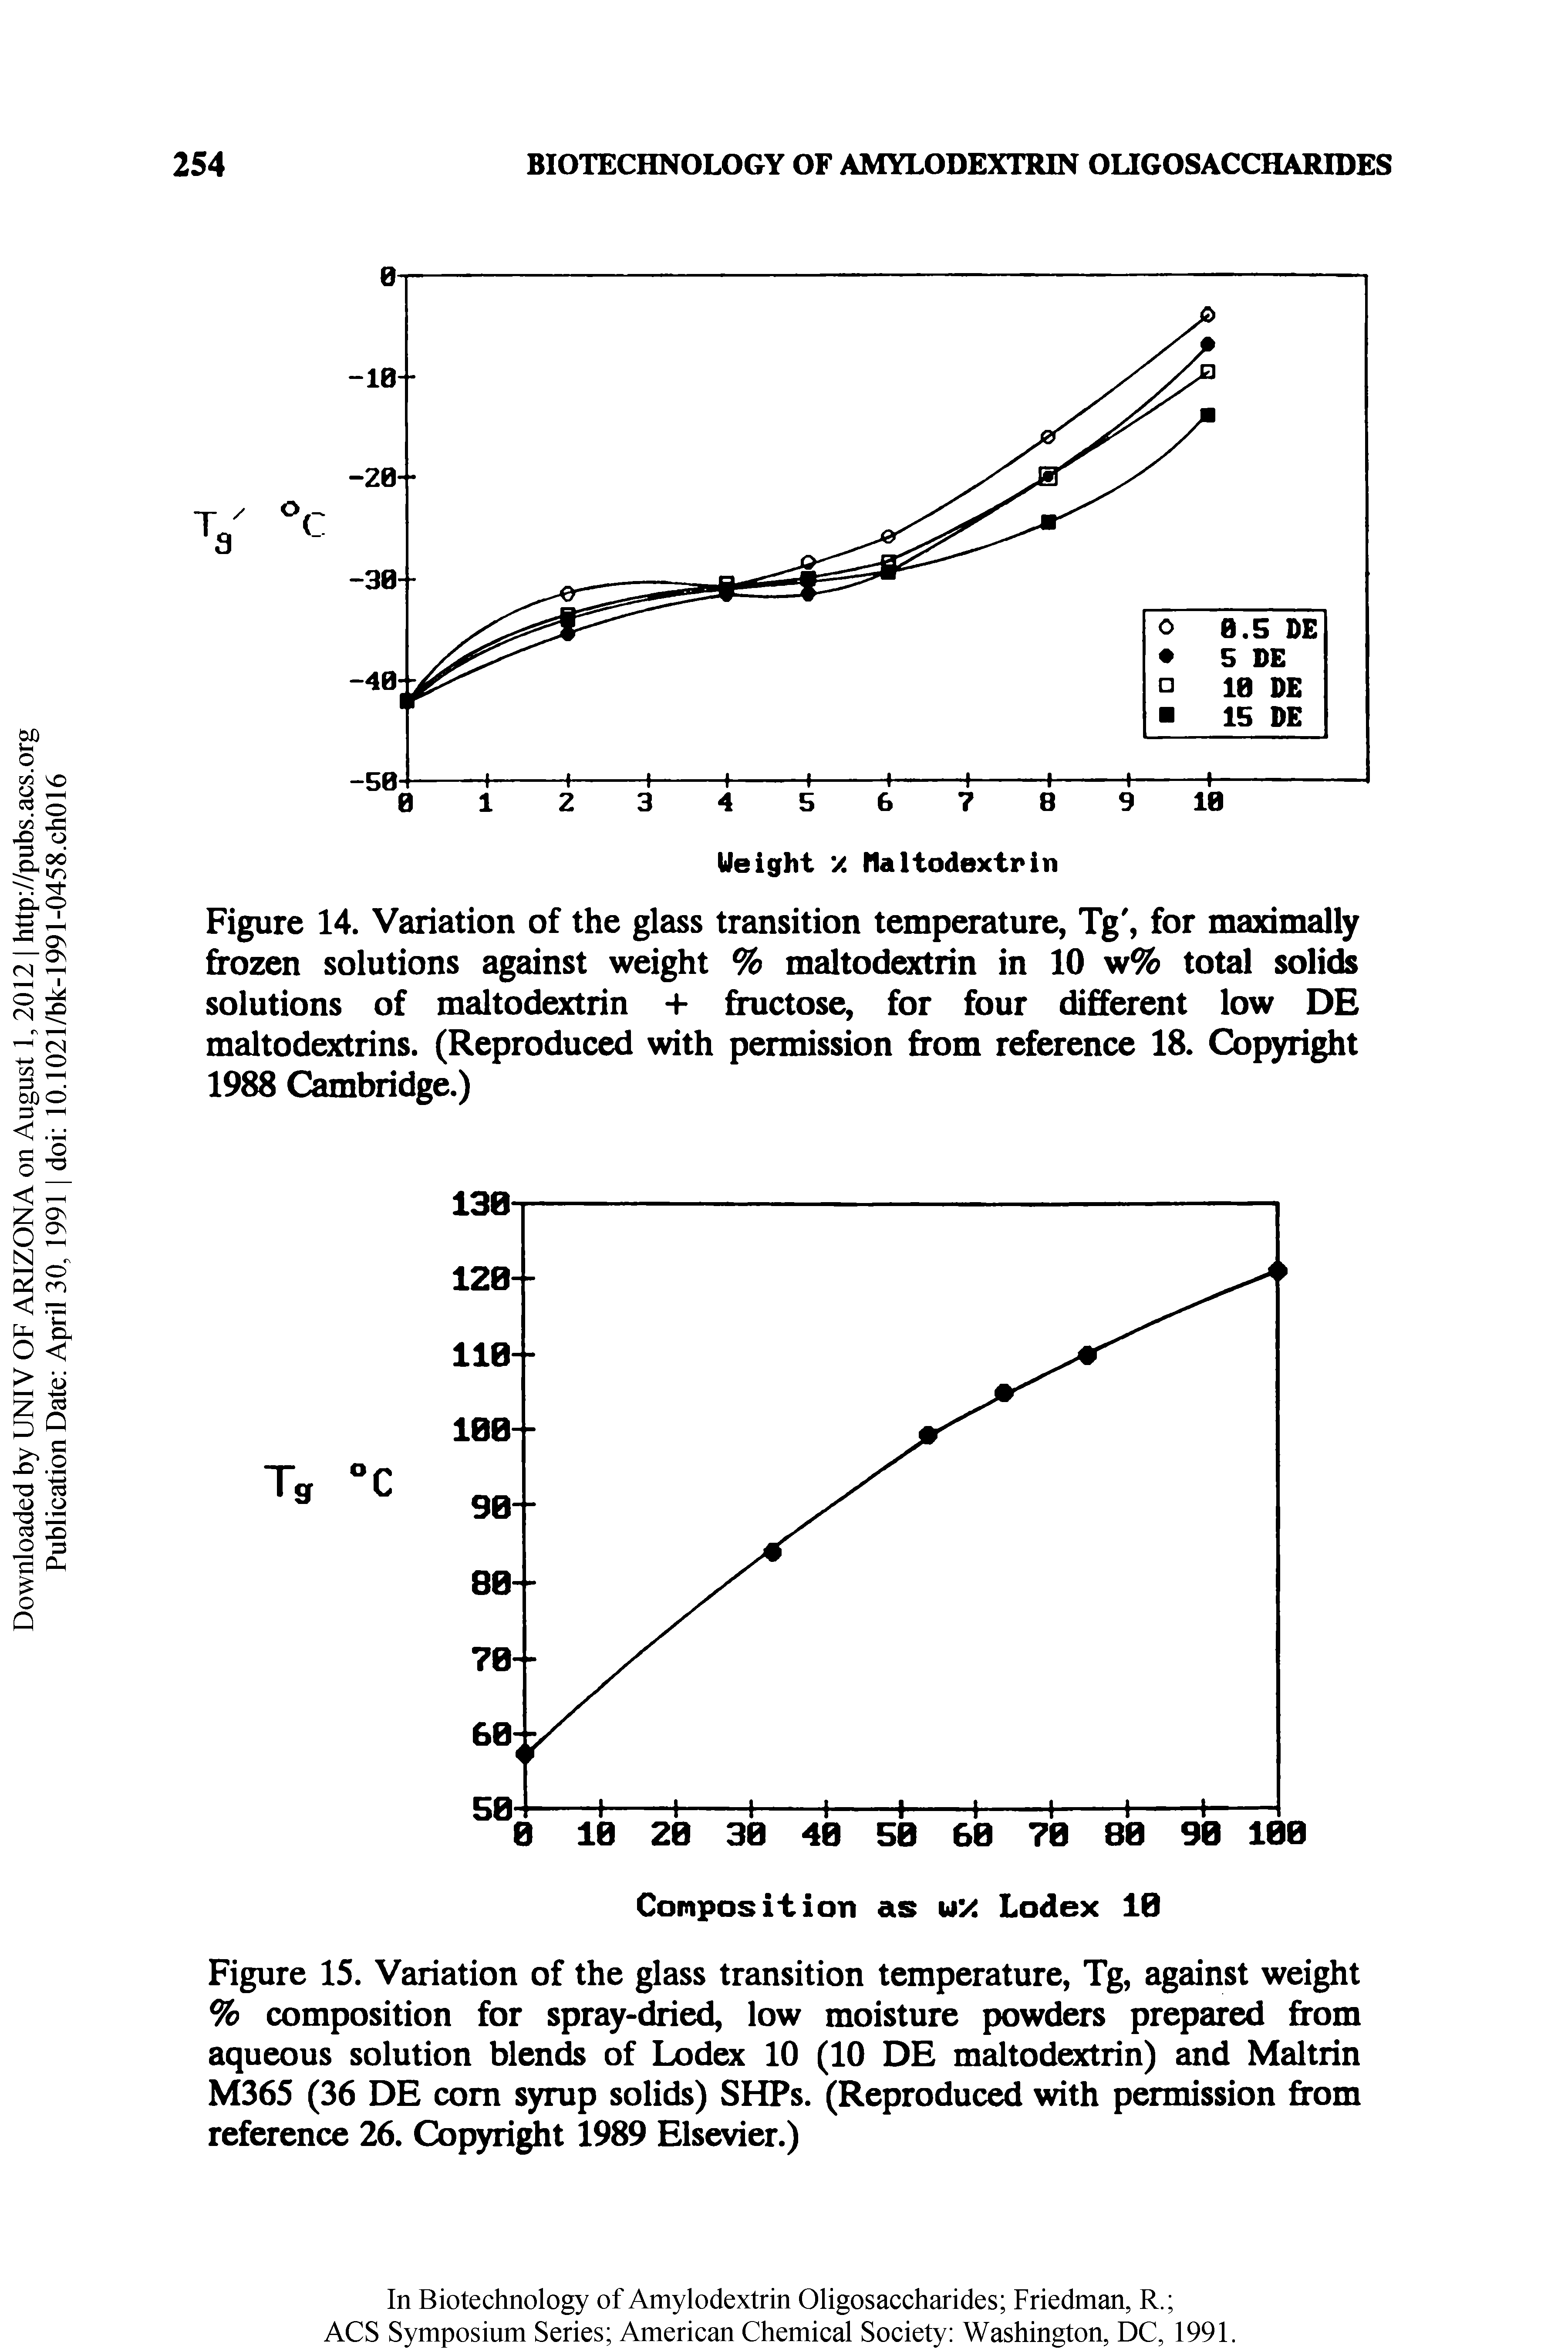 Figure 15. Variation of the glass transition temperature, Tg, against weight % composition for spray-dried, low moisture powders prepared from aqueous solution blends of Lodex 10 (10 DE maltodractrin) and Maltrin M365 (36 DE com syrup solids) SHPs. (Reproduced with permission from reference 26. Copyri t 1989 Elsevier.)...